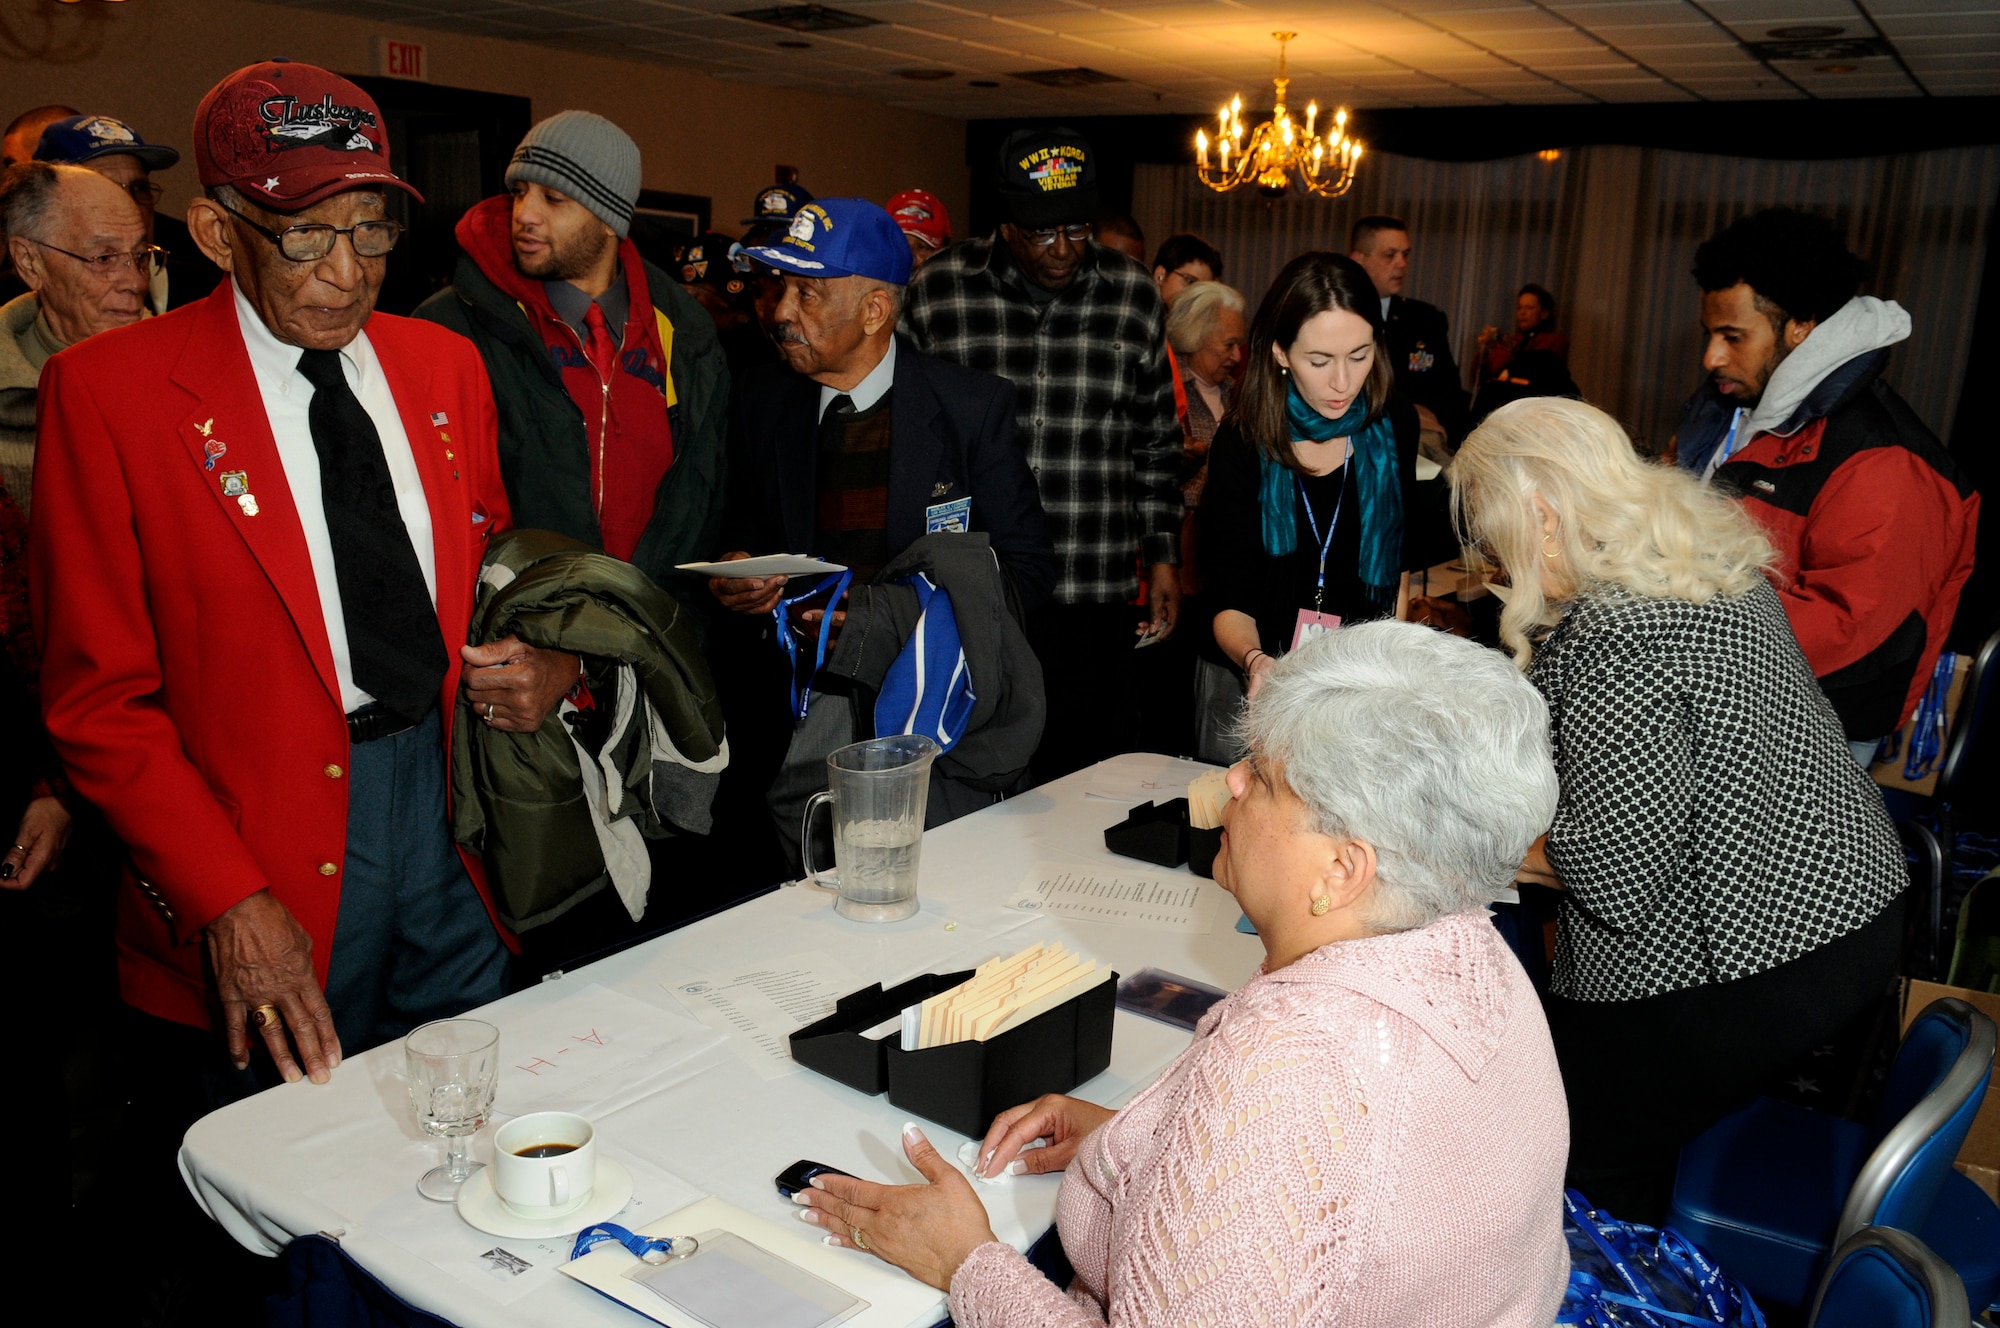 More than 180 Tuskegee Airmen and their families gathered for a special breakfast Jan. 20 at the Bolling Club on Bolling Air Force Base, D.C., before being bused downtown for the 2009 inaugural events. (U.S. Air Force photo/Staff Sgt. Dan DeCook)